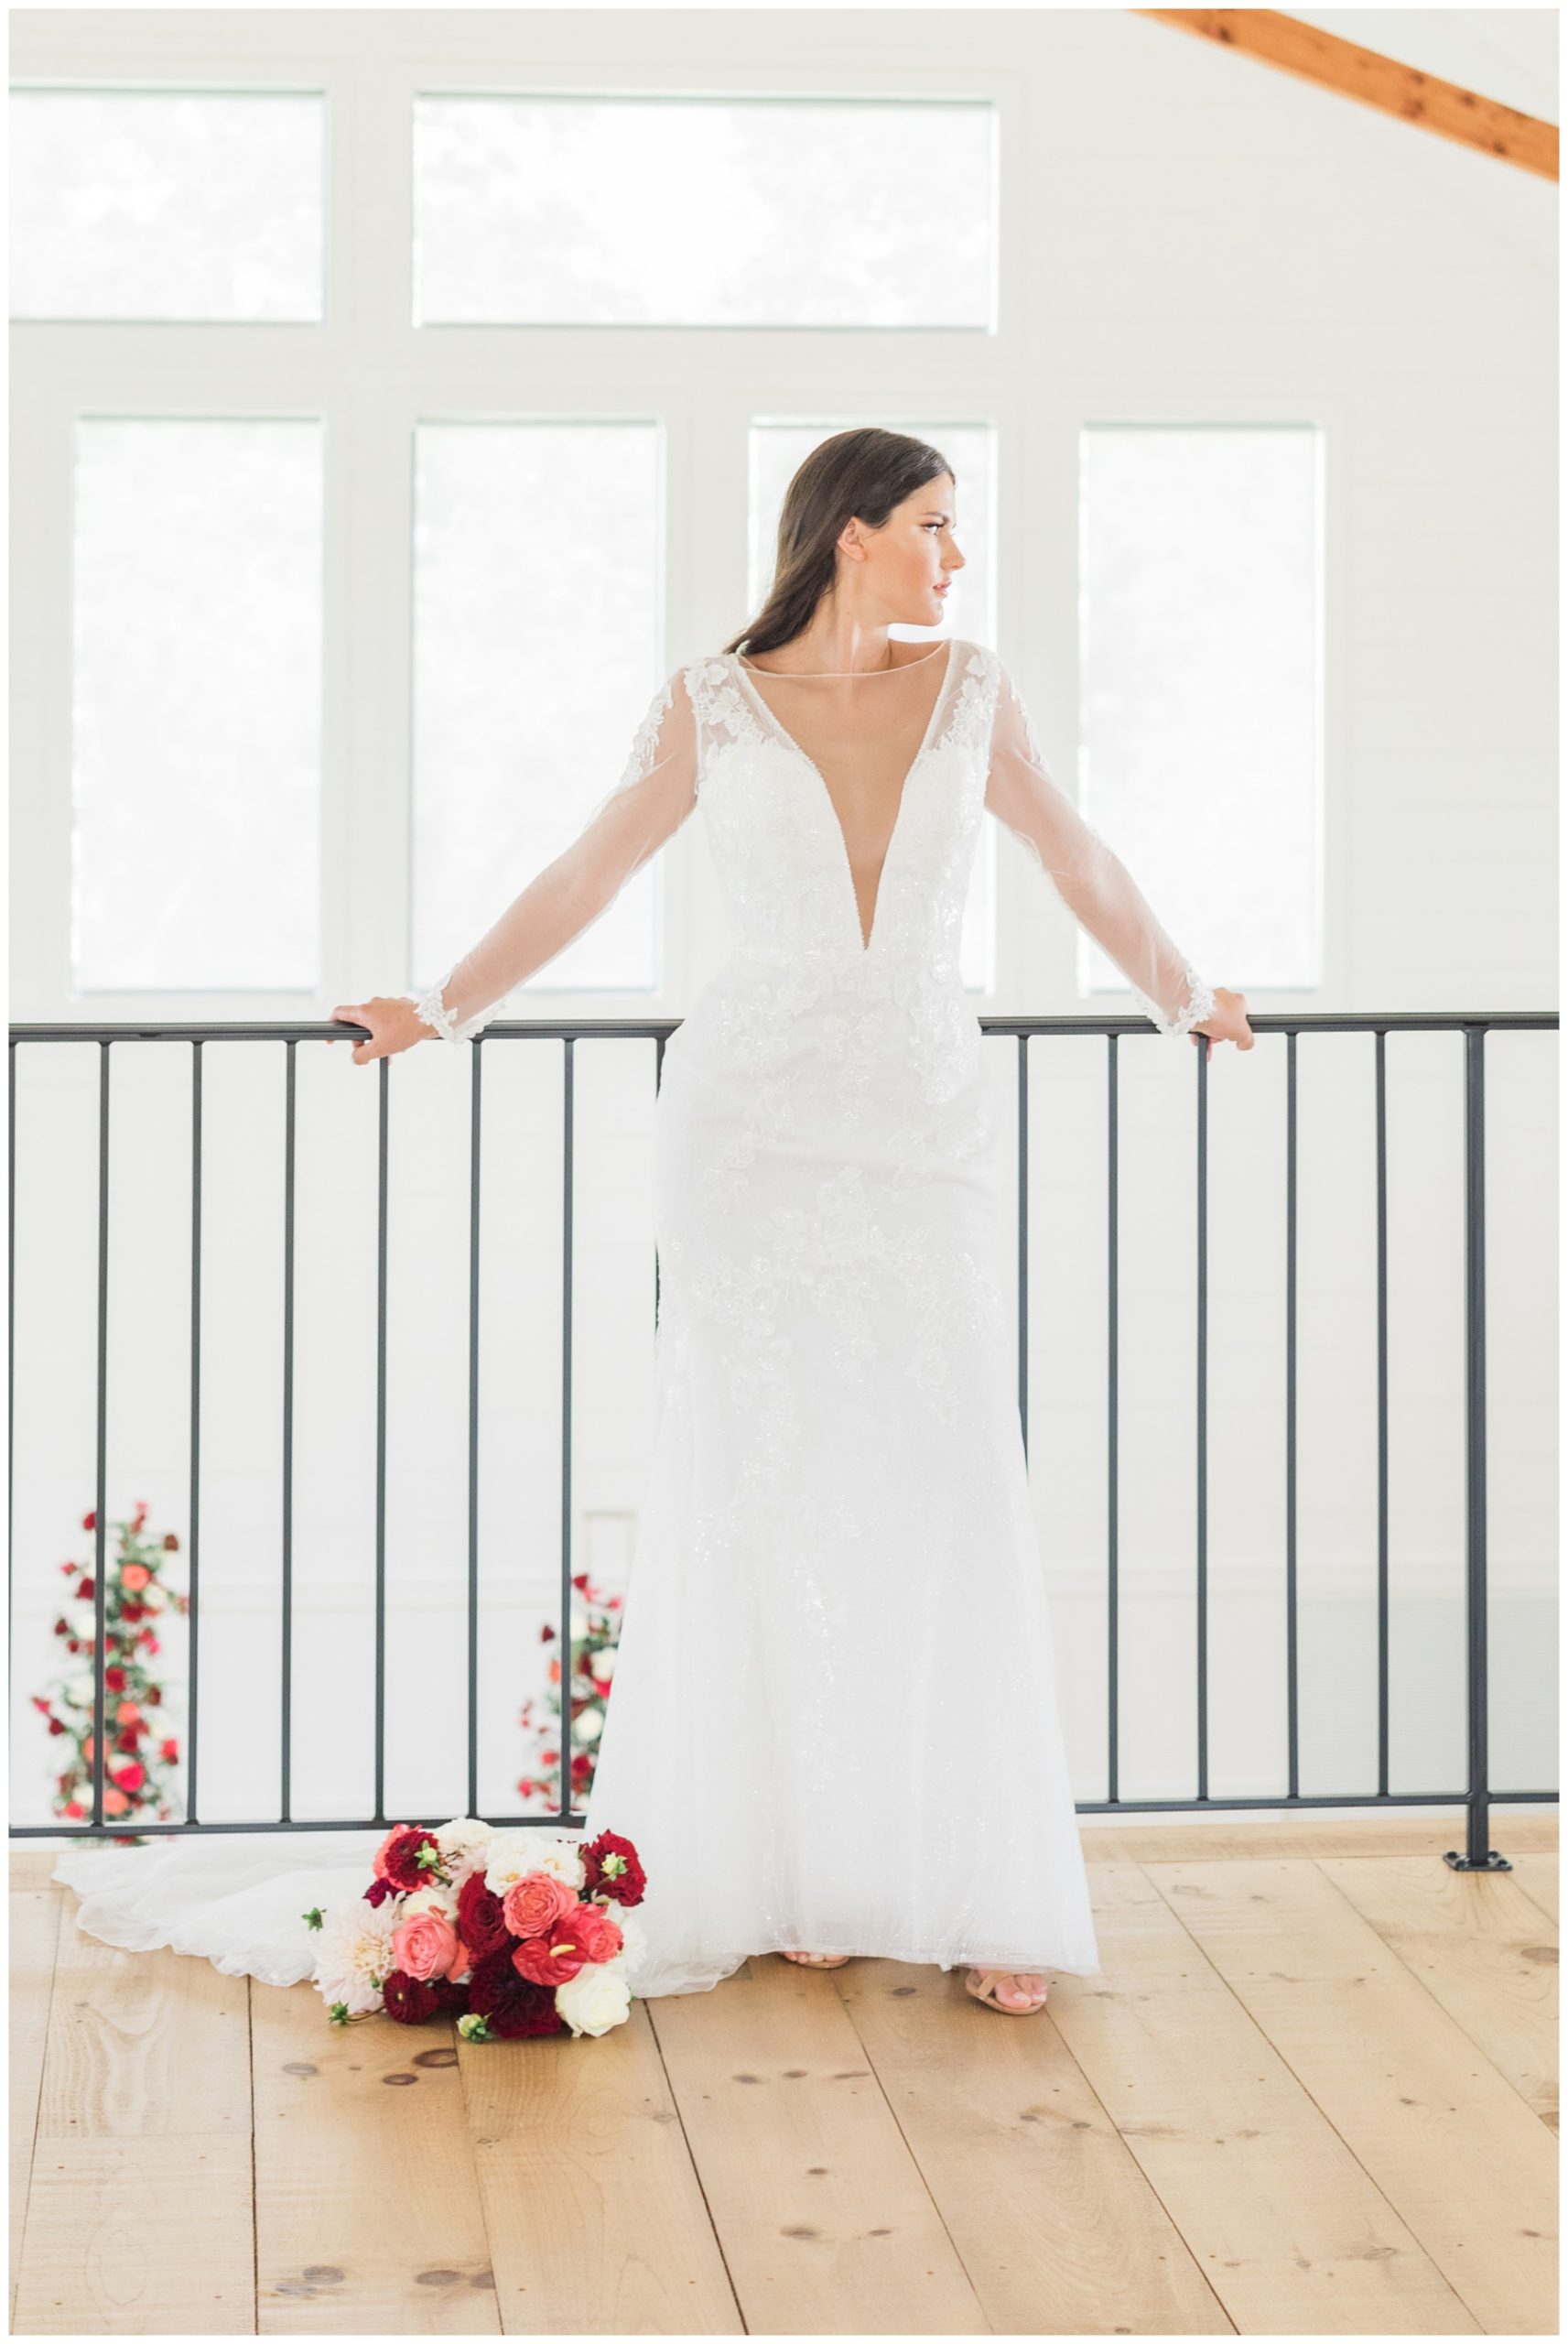 Bride in a long sleeved wedding gown with deep v neckline